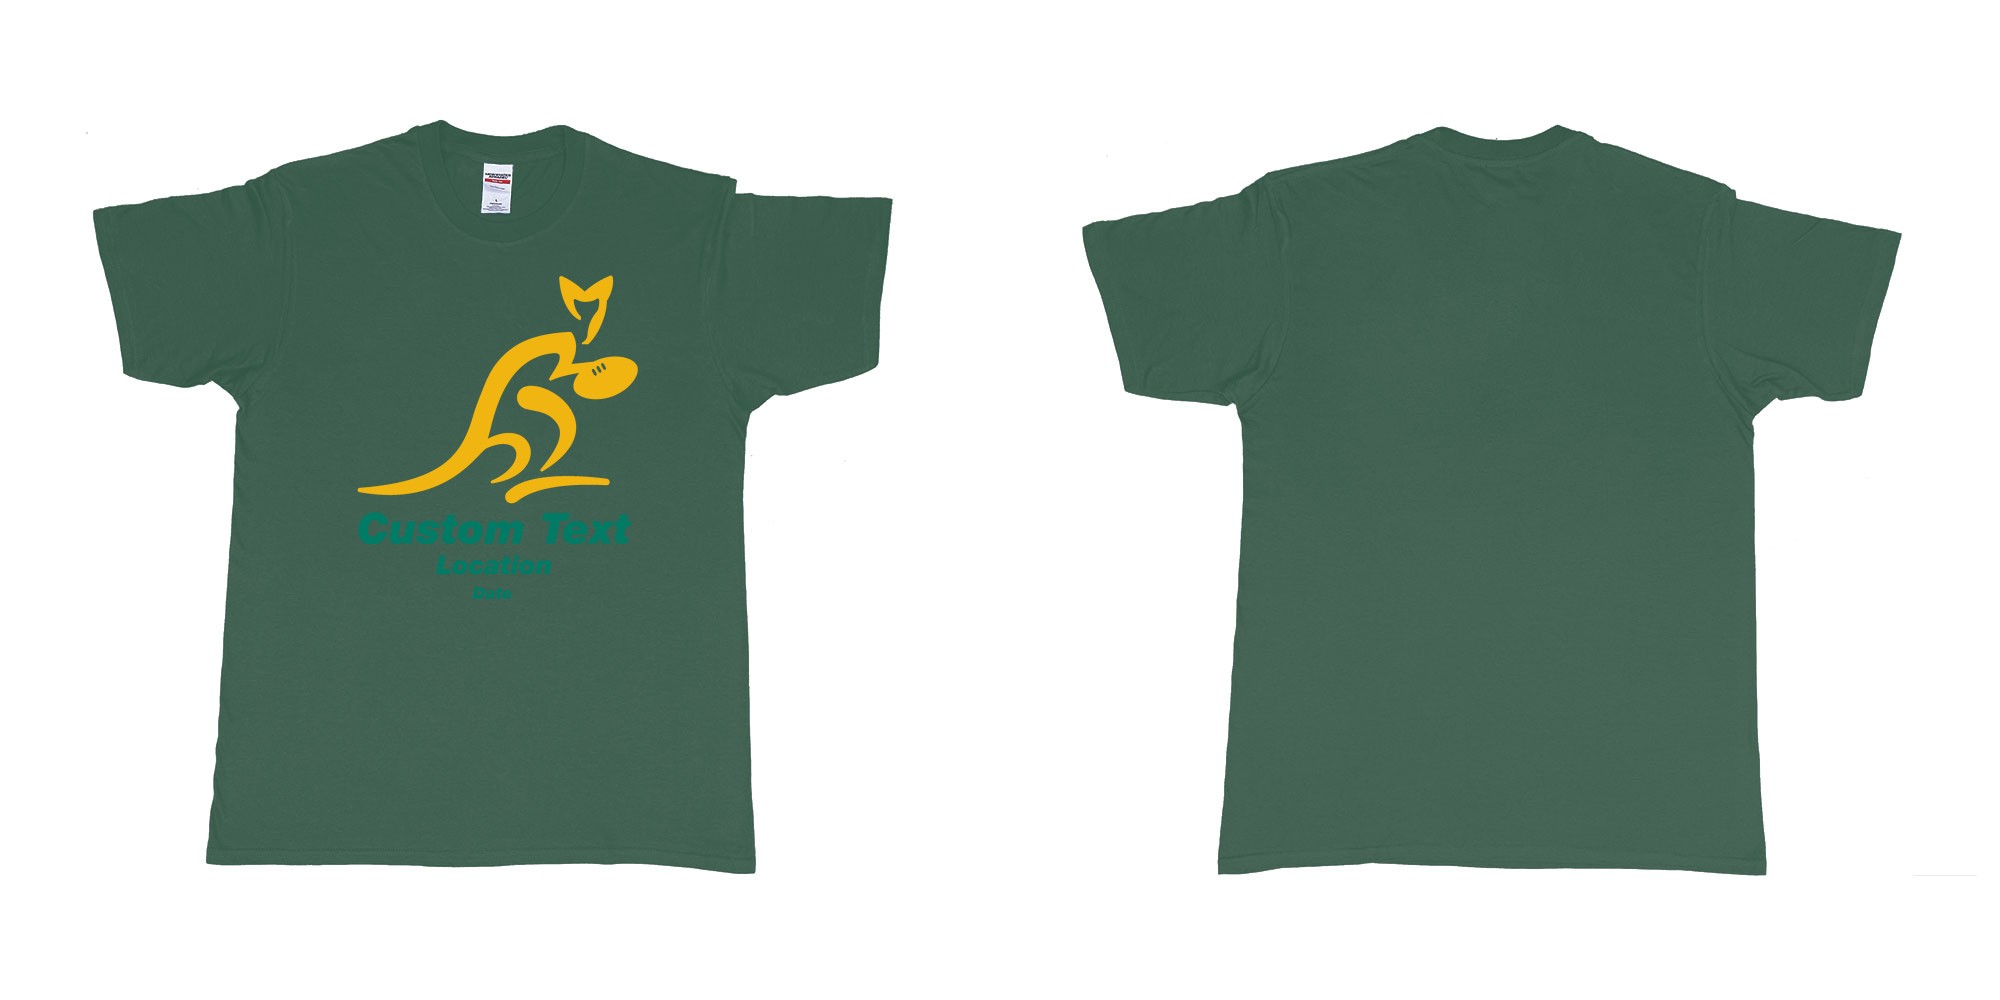 Custom tshirt design australia national rugby union team the wallabies in fabric color forest-green choice your own text made in Bali by The Pirate Way